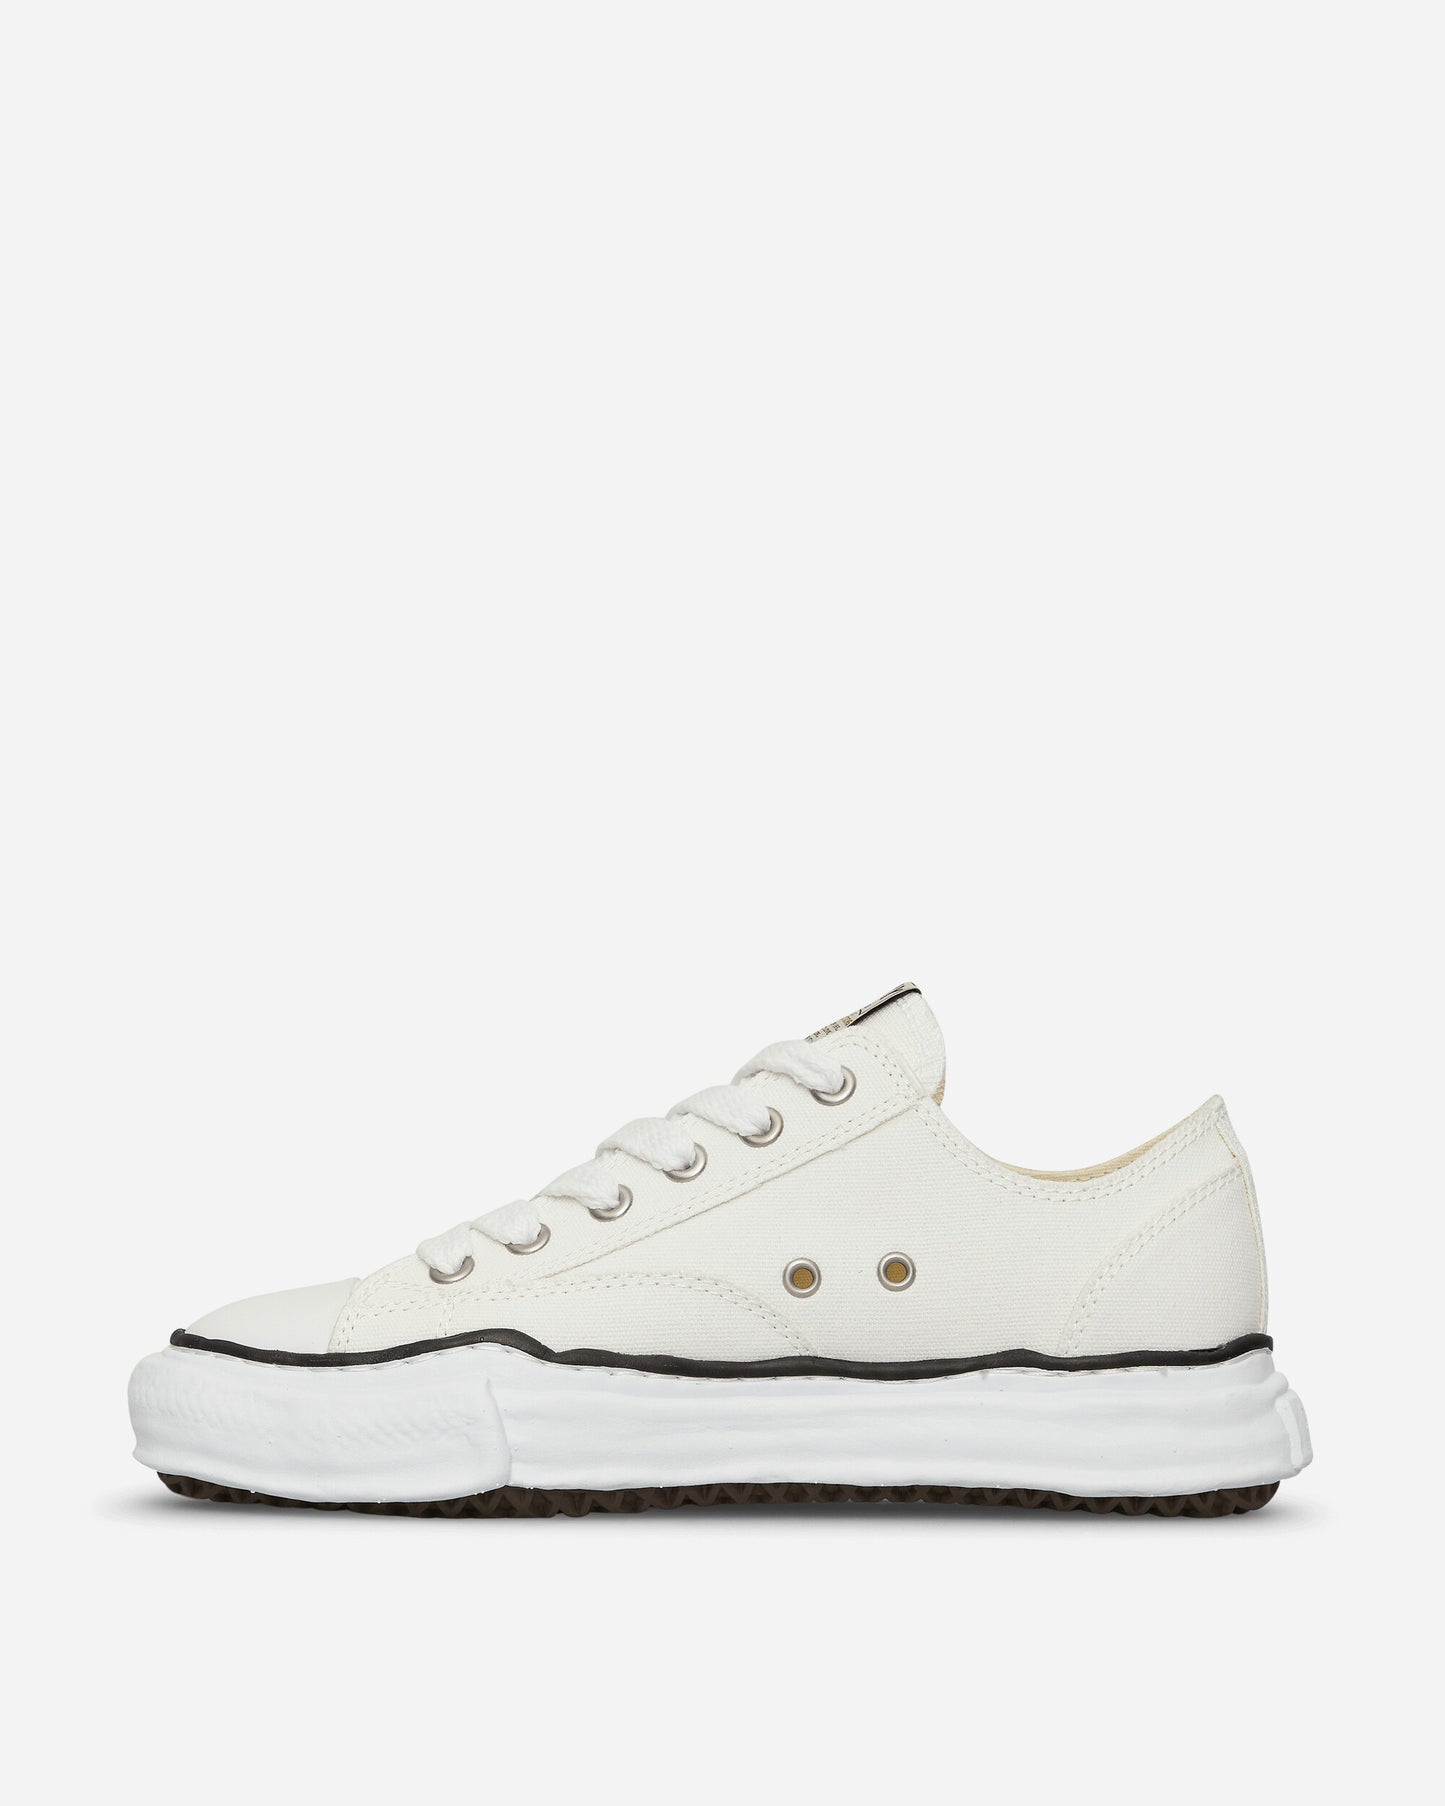 Maison MIHARA YASUHIRO Peterson Low/Original Sole Canvas Low-Top Sneaker White Sneakers Low A01FW702 WHITE